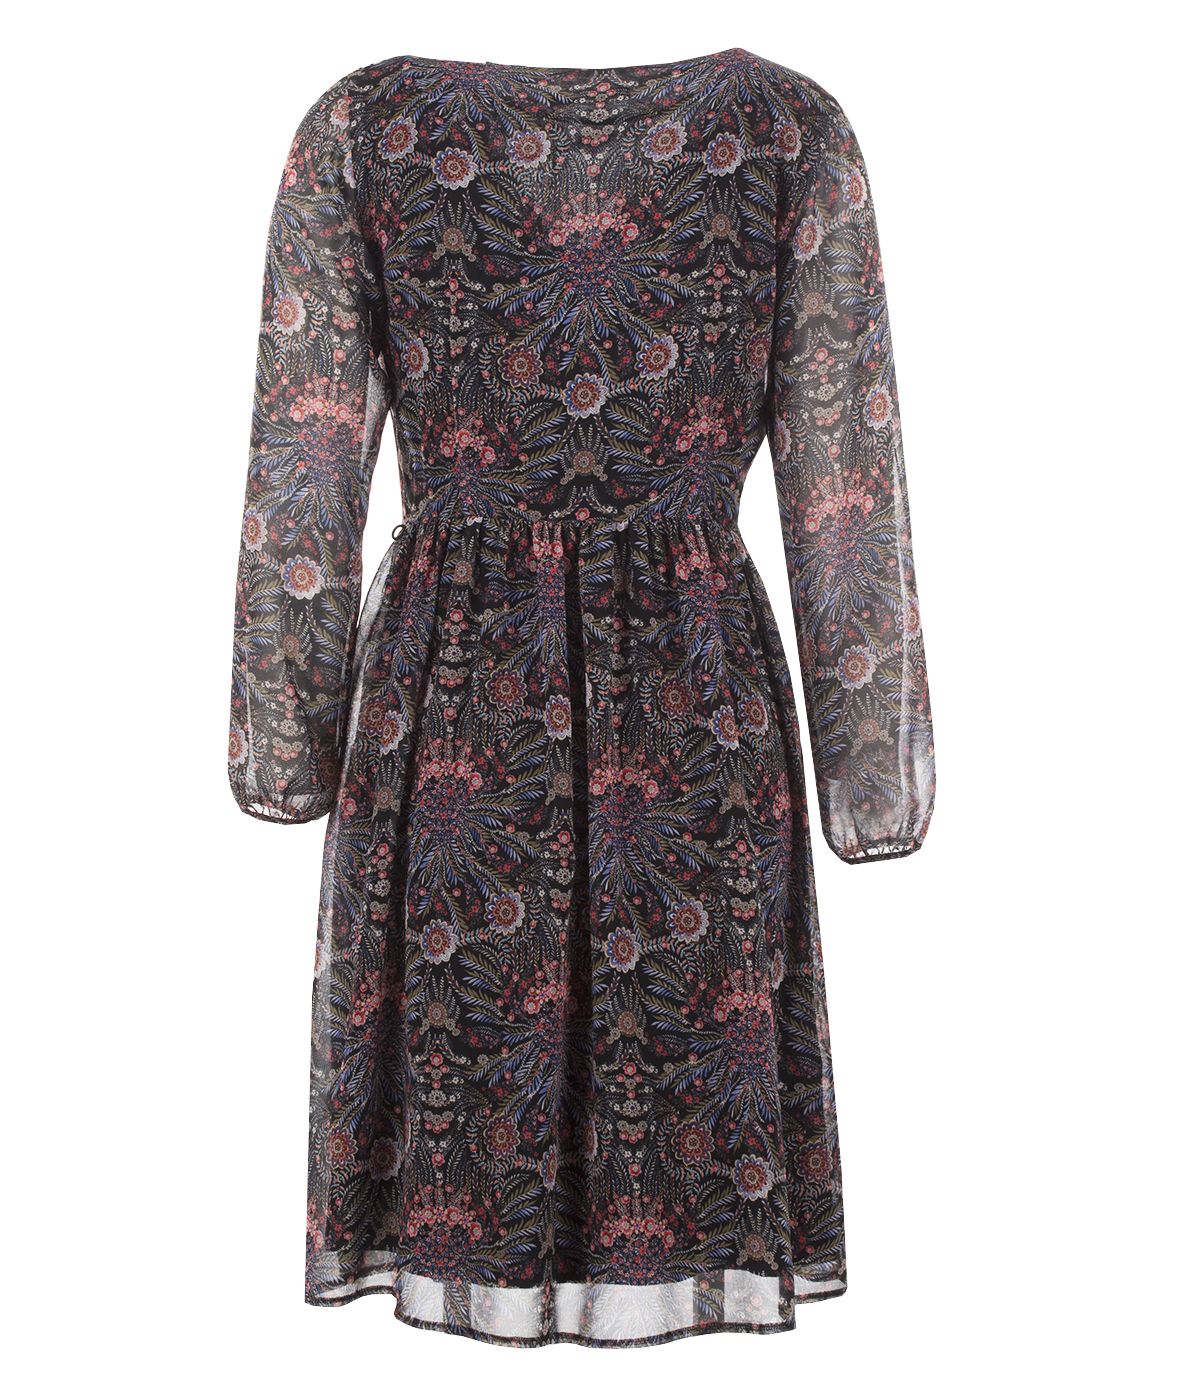 Chiffon dress with long sleeves, emphasized waist, with paisley print  1